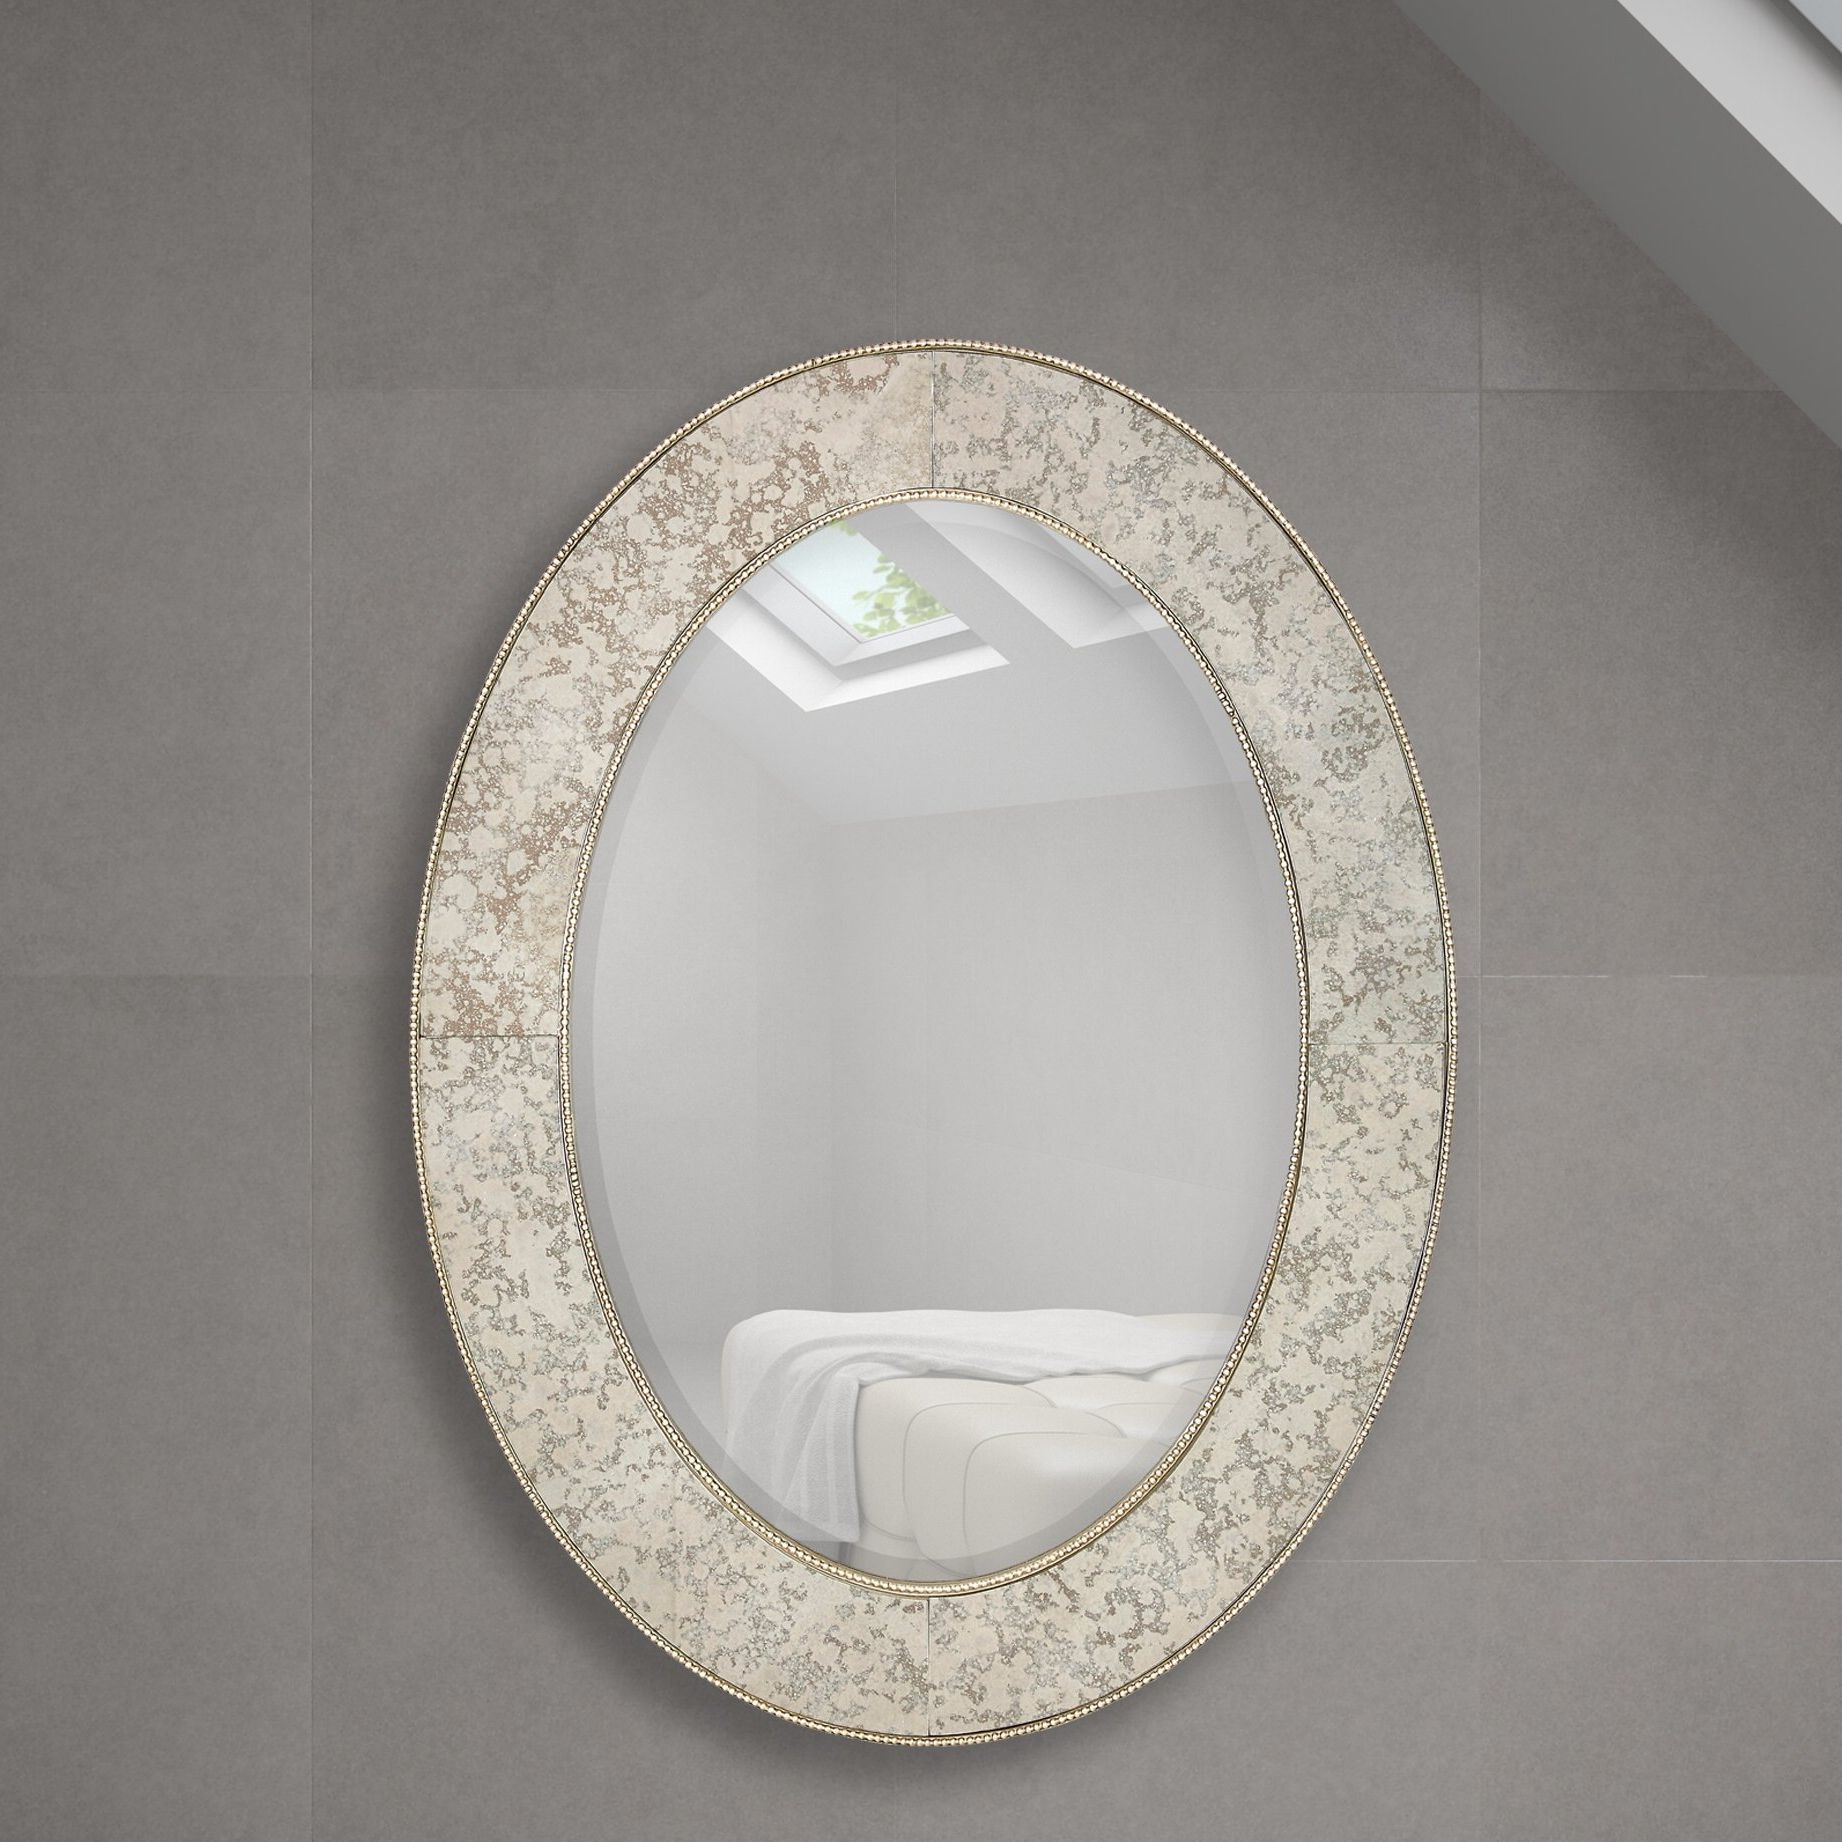 Black Oval Cut Wall Mirrors Within Favorite Majestic Mirror Classy Oval Shape Framed Beveled Glass Wall Mirror (View 4 of 15)